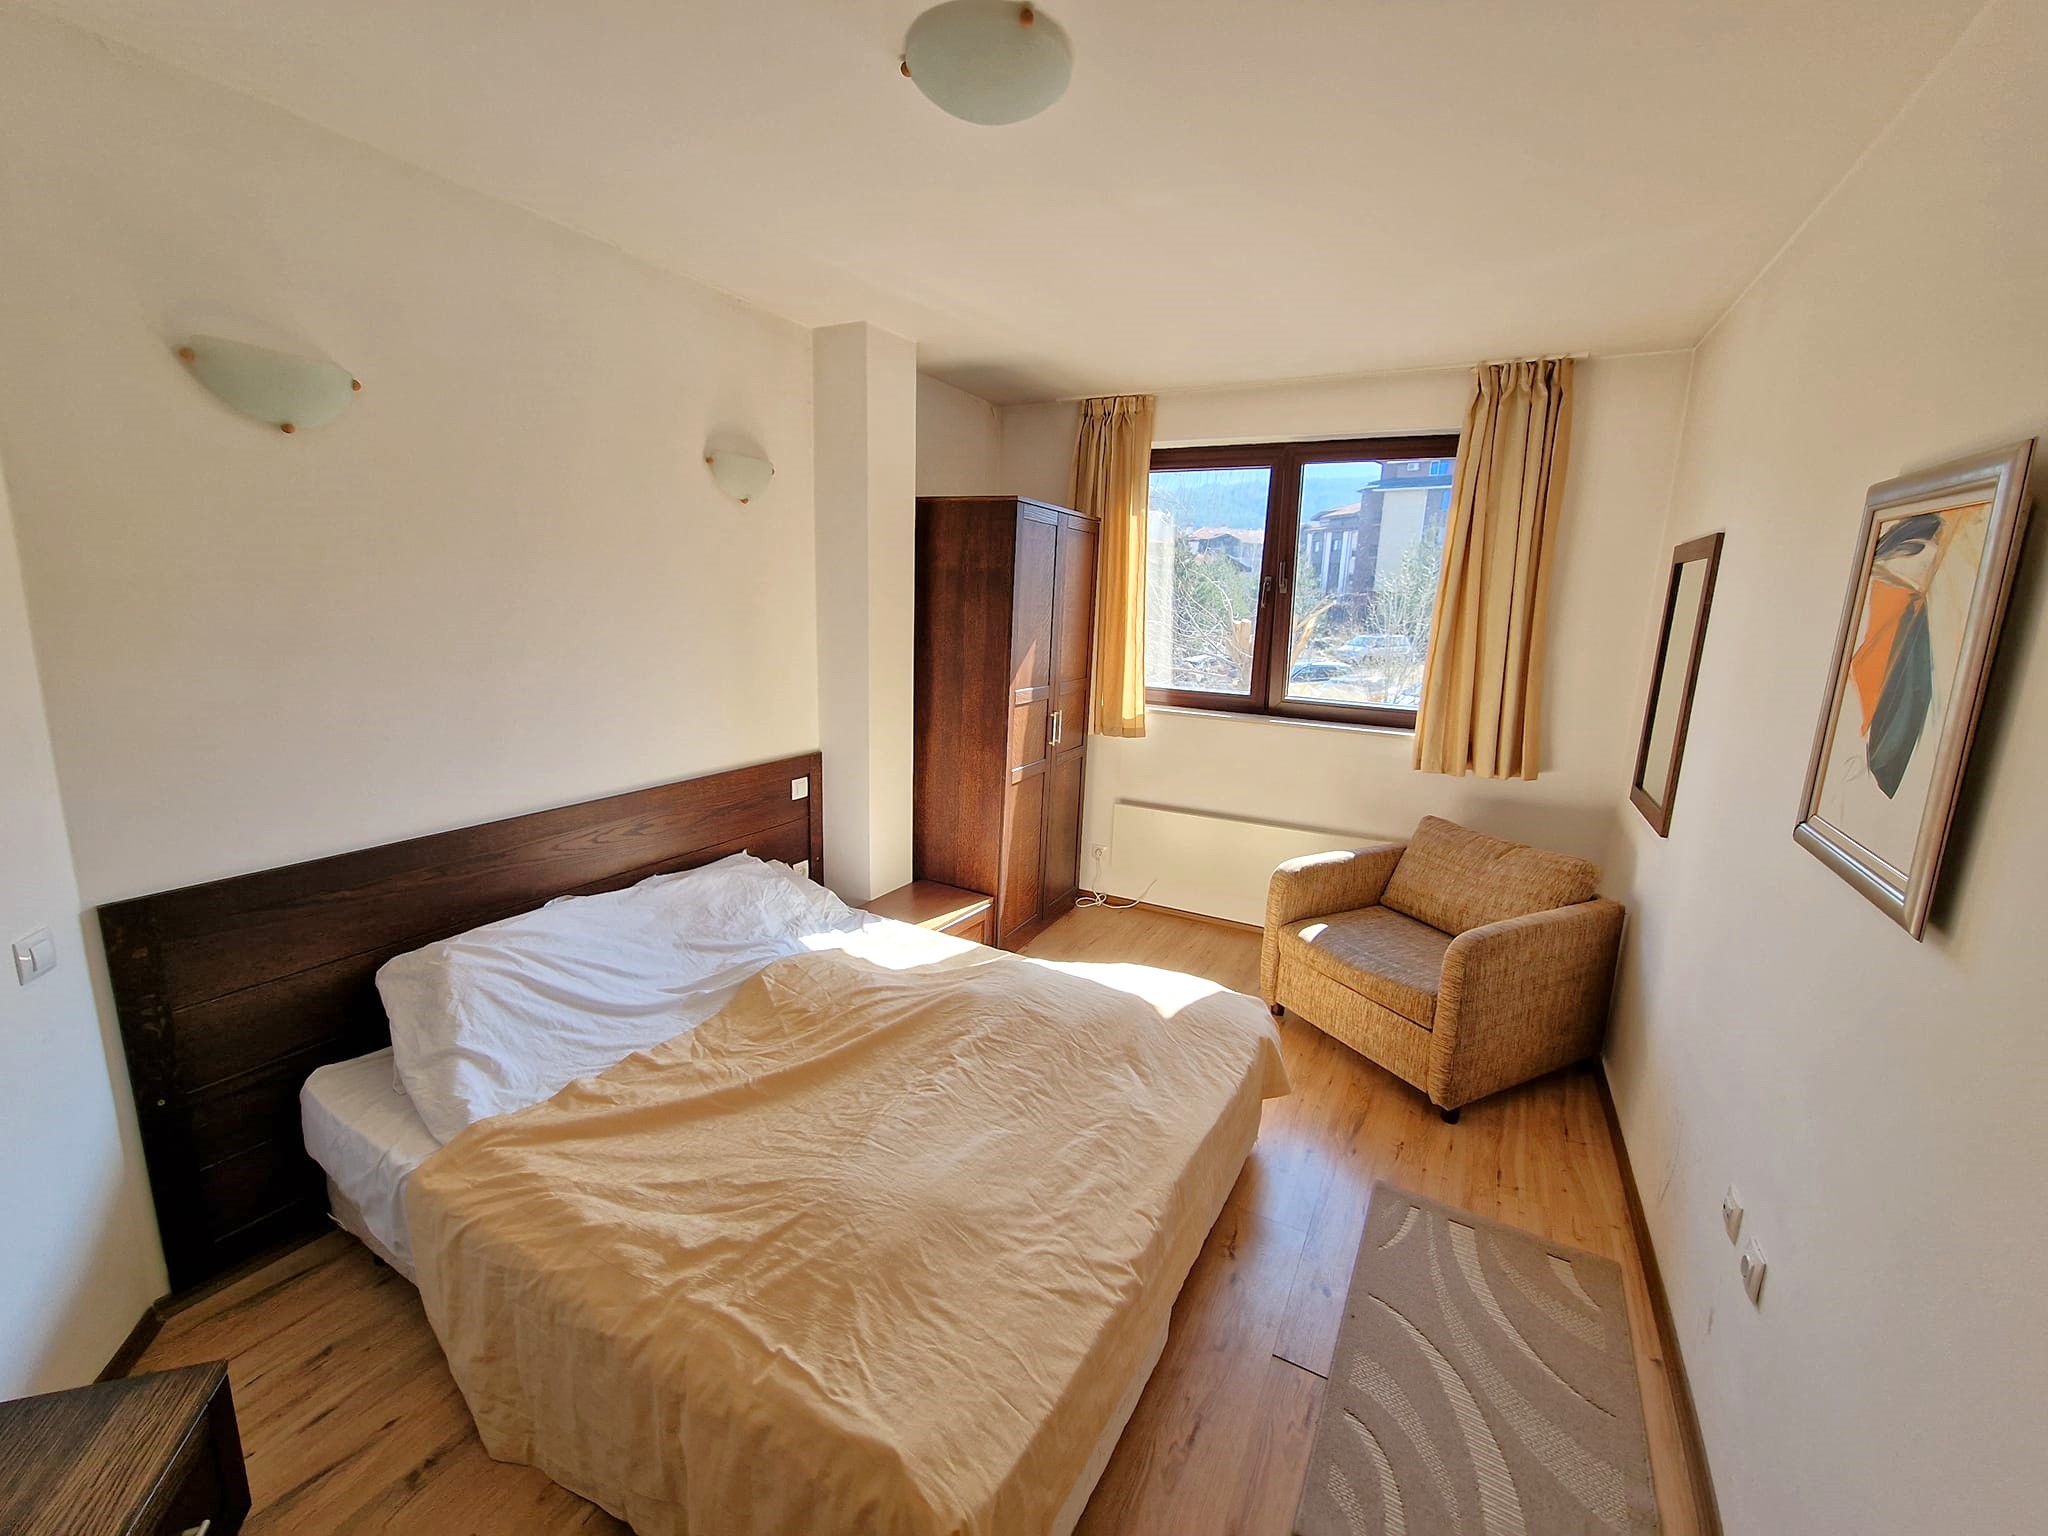 South one bedroom apartment only 200 meters from Kempinski Hotel and Victoria Restaurant